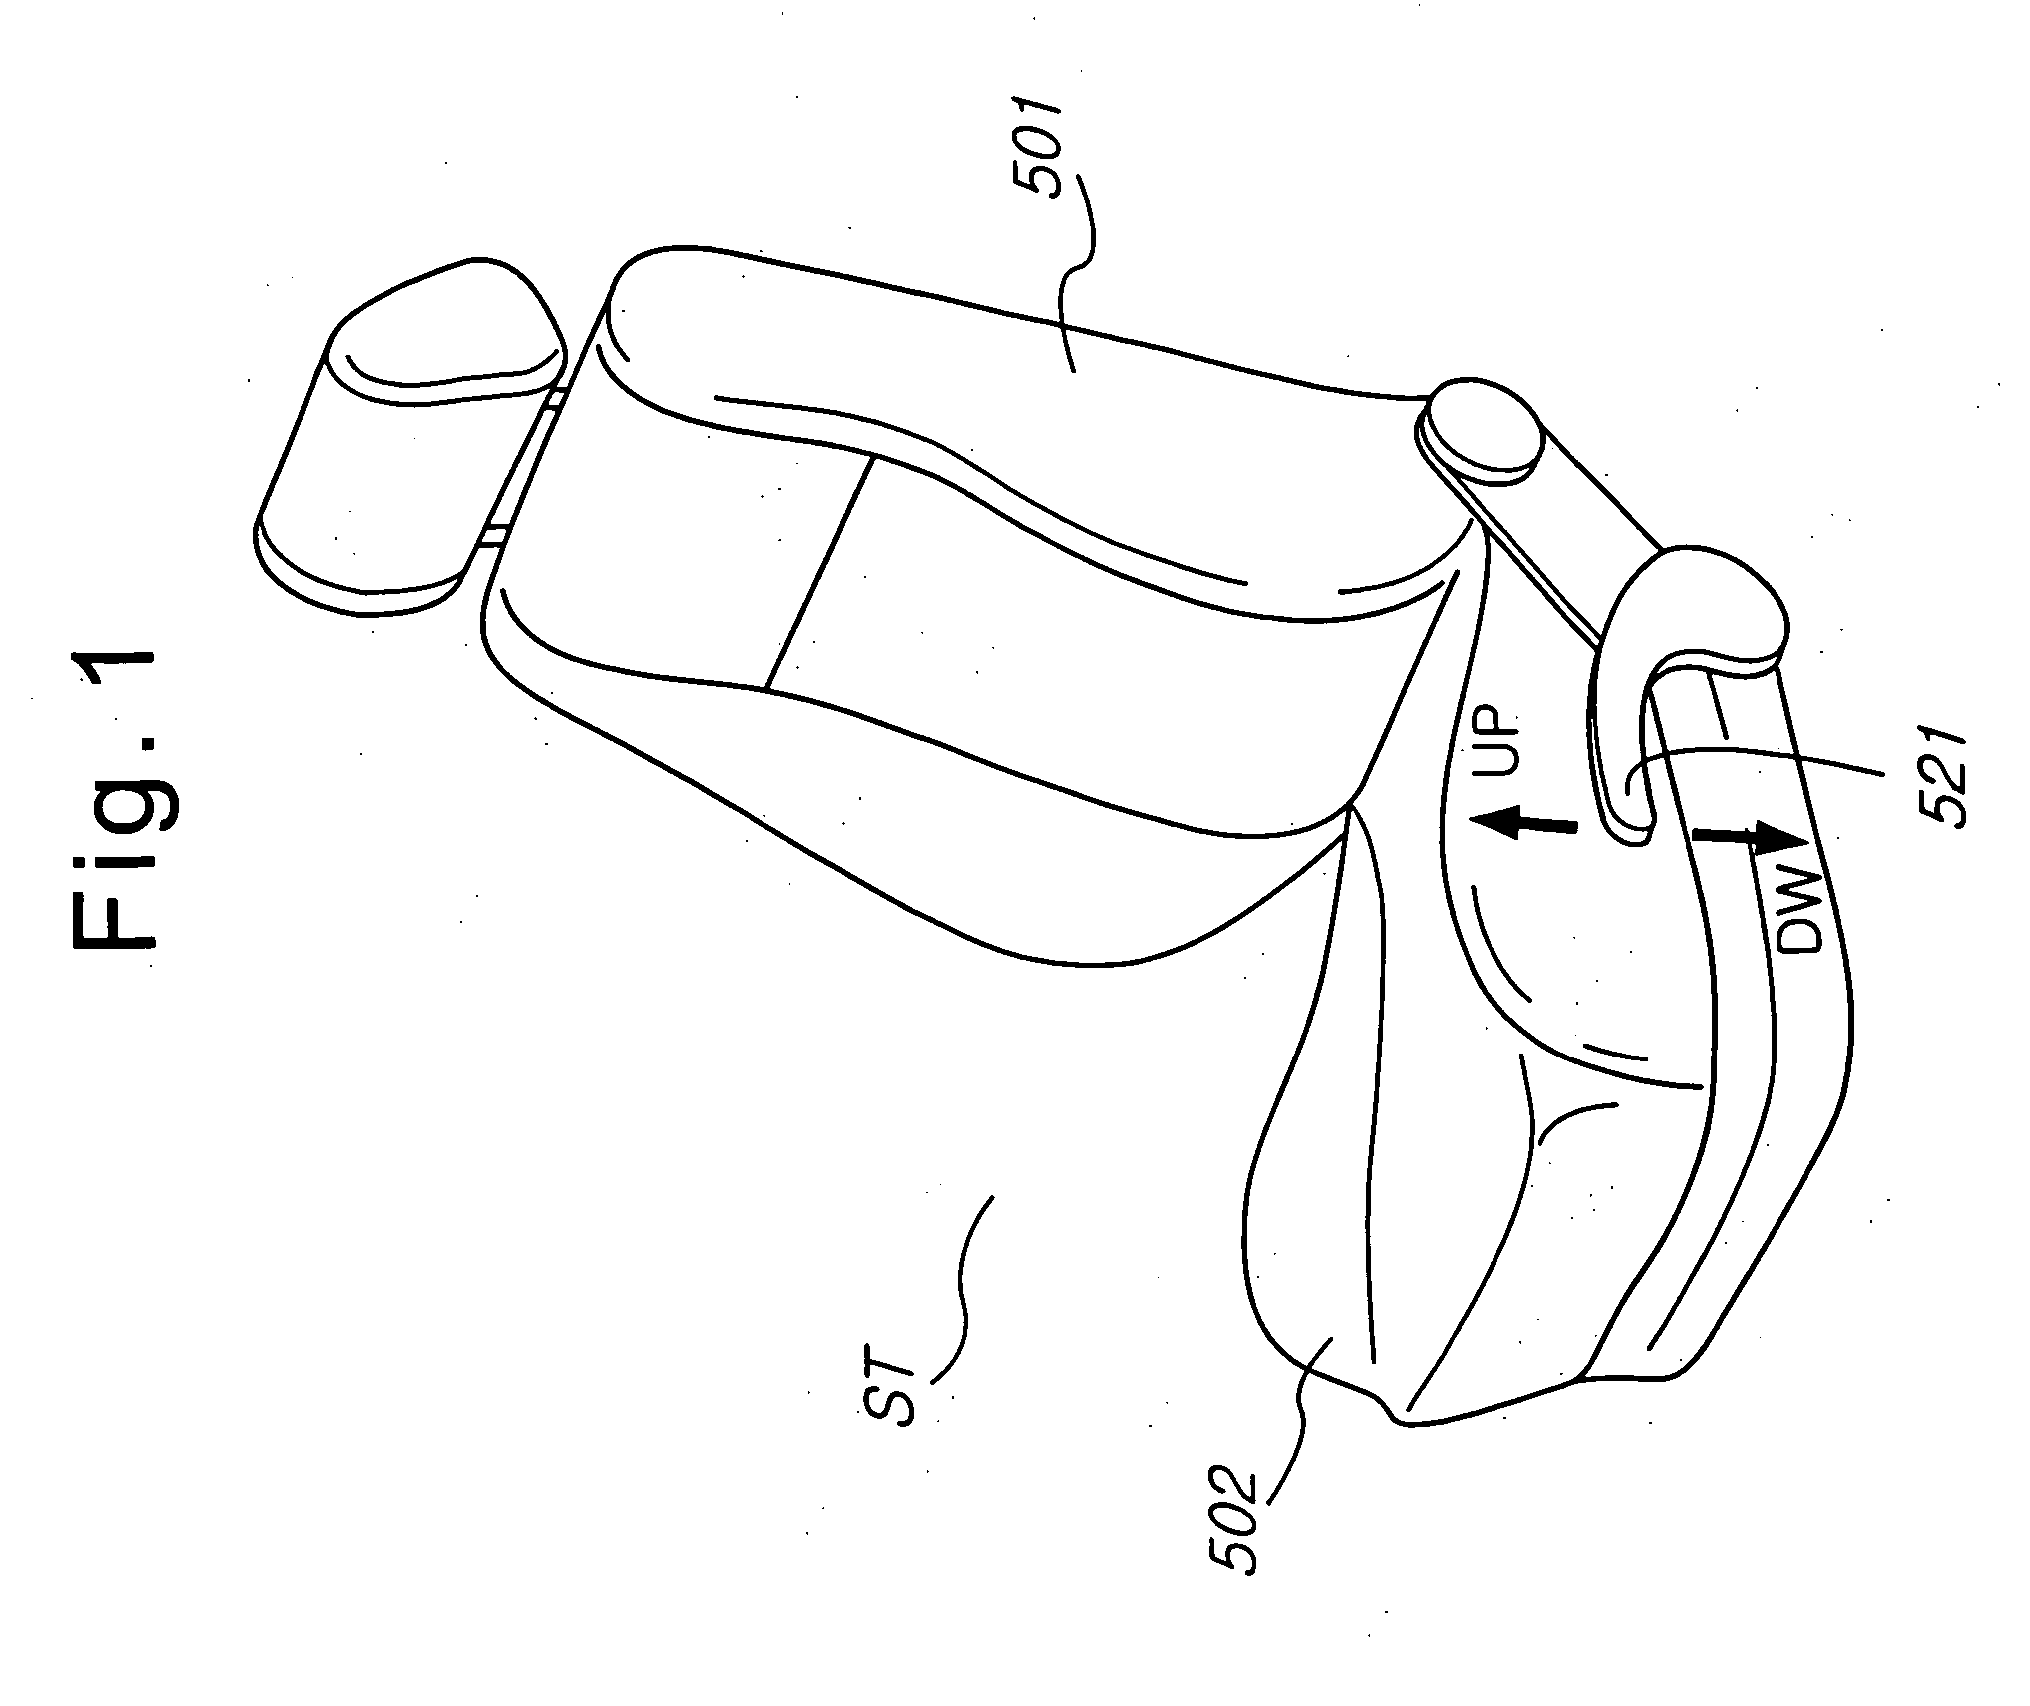 Seat cushion pumping device for vehicle